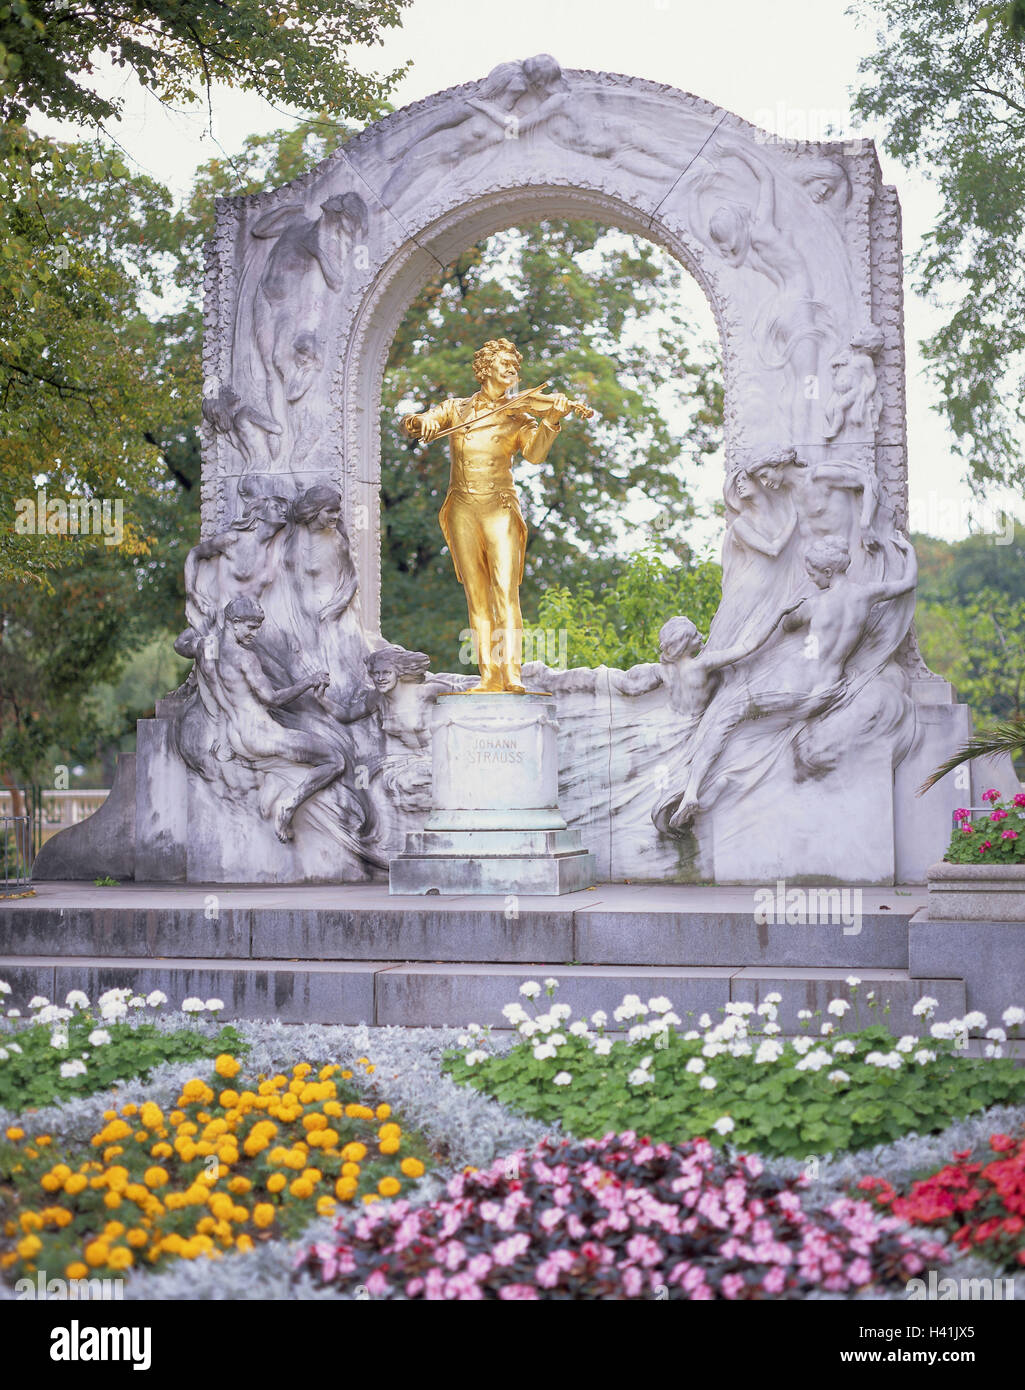 Austria, Vienna, town park, Johann, Strauss monument, Europe, street the emperors and kings, capital, town, cultural town, freeze frame, Johann Strauss's monument, composer, waltz king, in 1825-1899, statue, gilds, art, sculpture, culture, place of intere Stock Photo